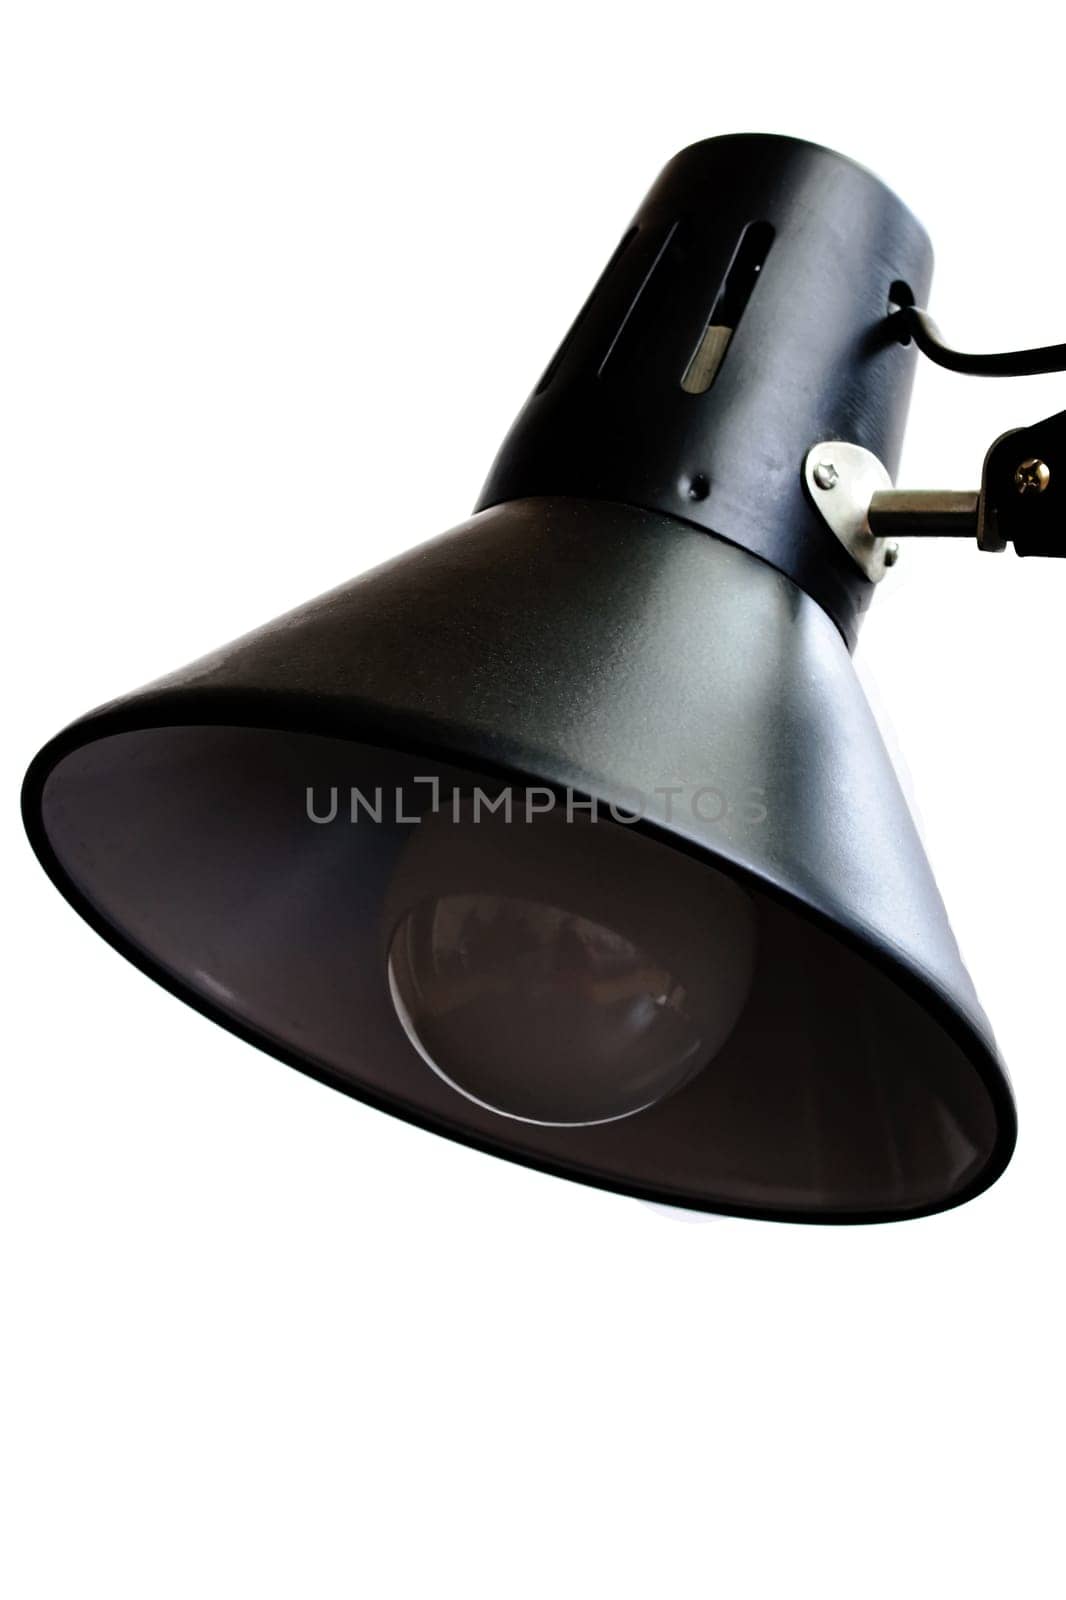 Black metal table lamp isolated on white background close up